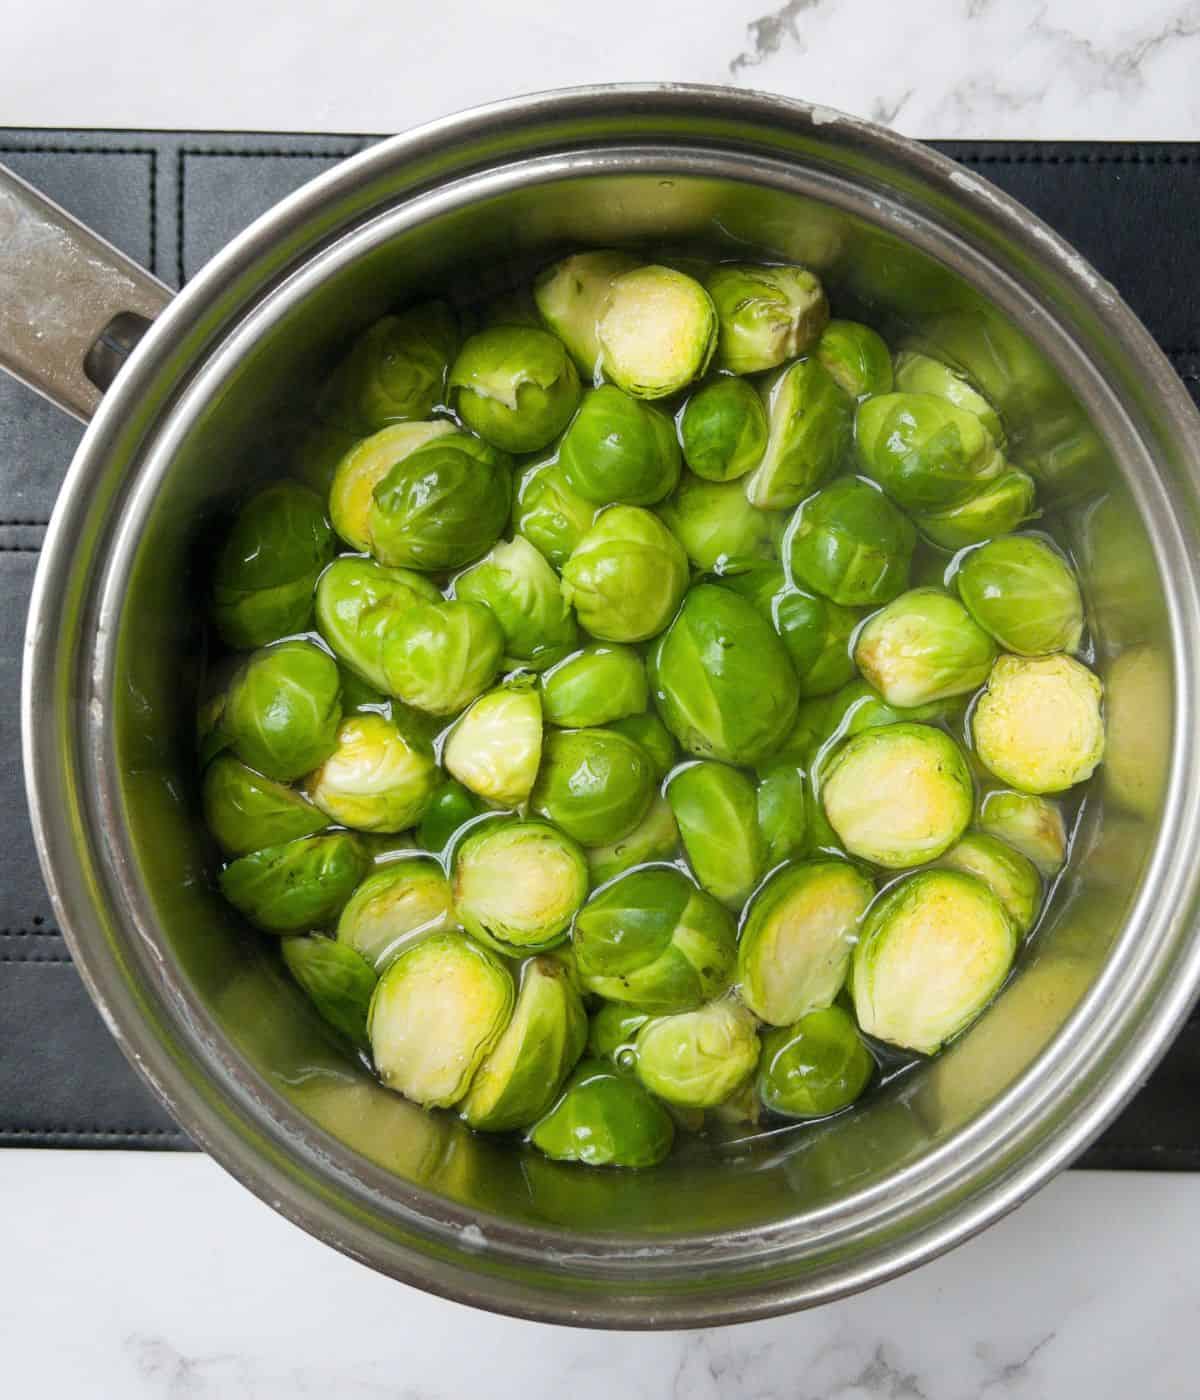 Brussel sprouts boiling in. a saucepan.